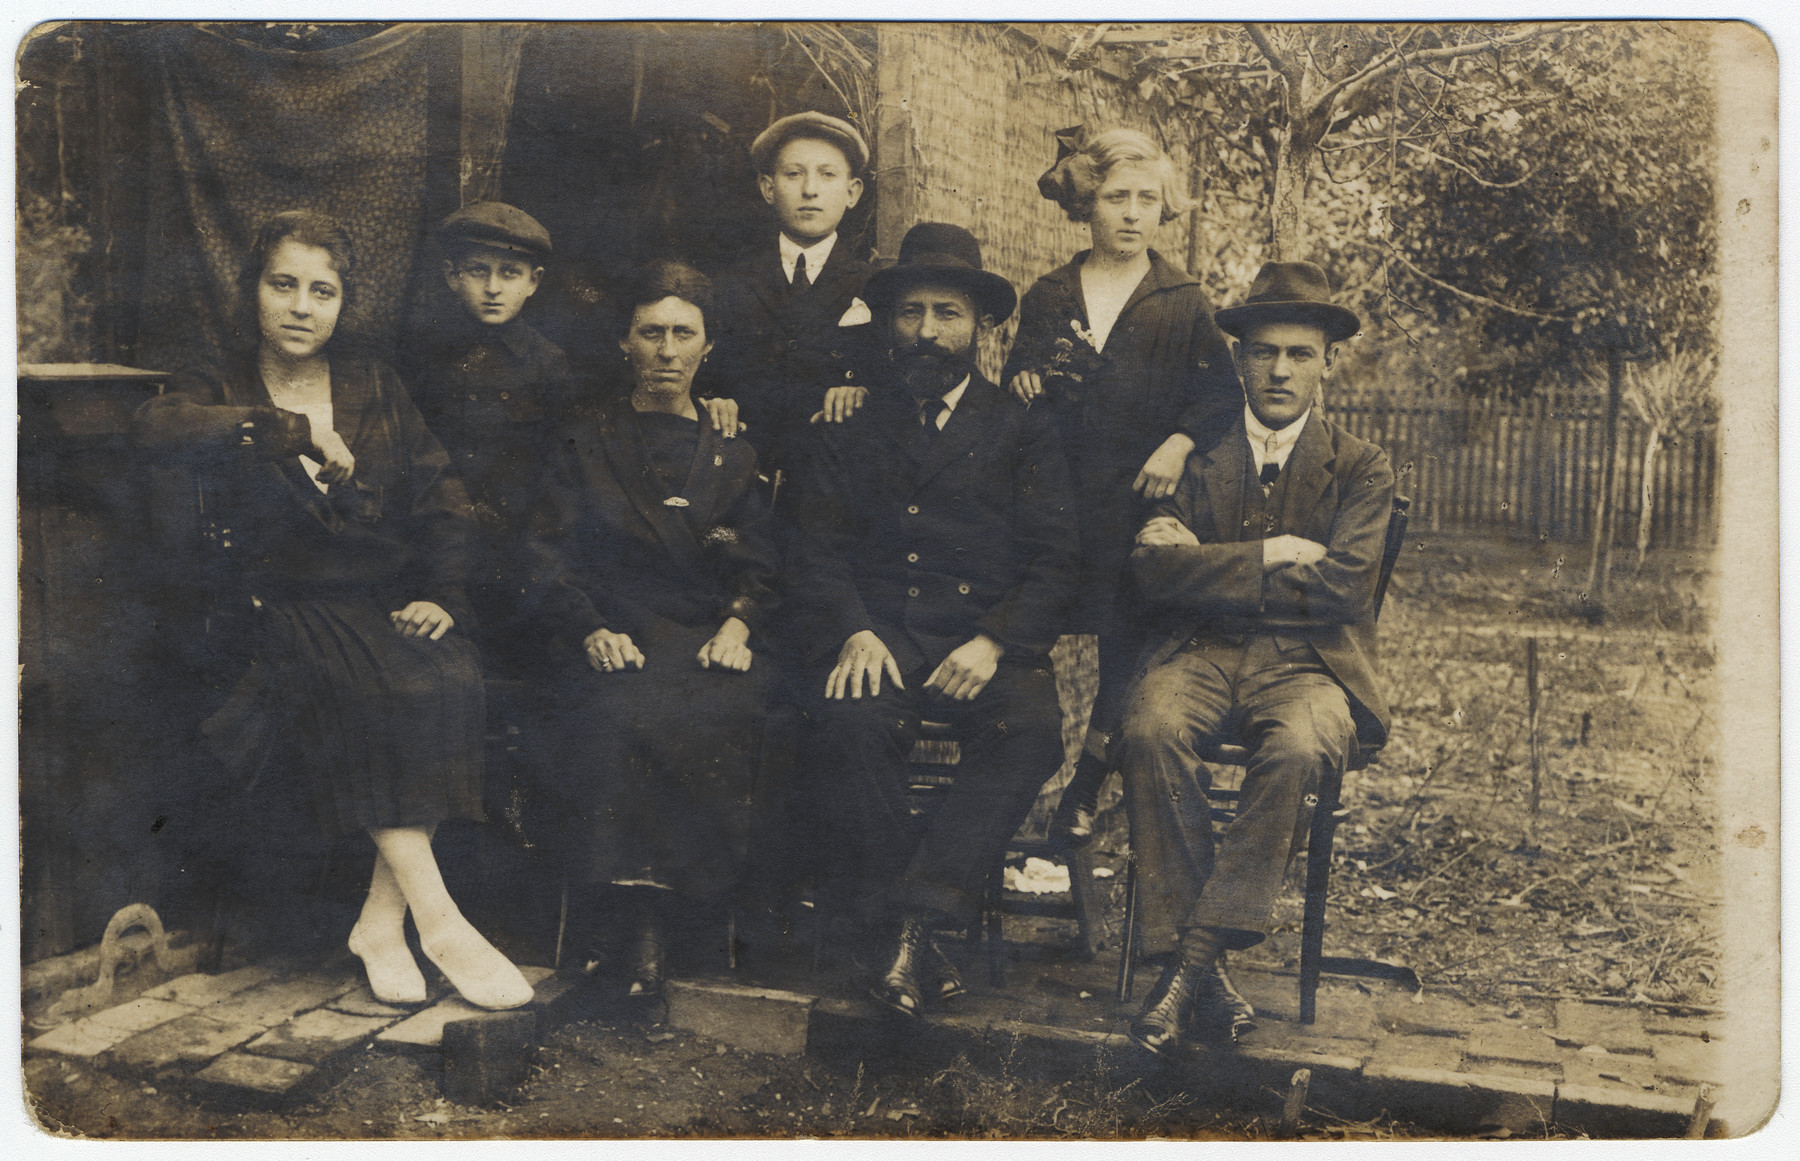 Prewar portrait of the Freedman family.

From left to right are a married sister, Yitzchak, the mother Hennia, Albert, the father Yona, a sister and the older sister's husbnd.  Of the Freedman family only Yitzchak, Albert and Yona survived.